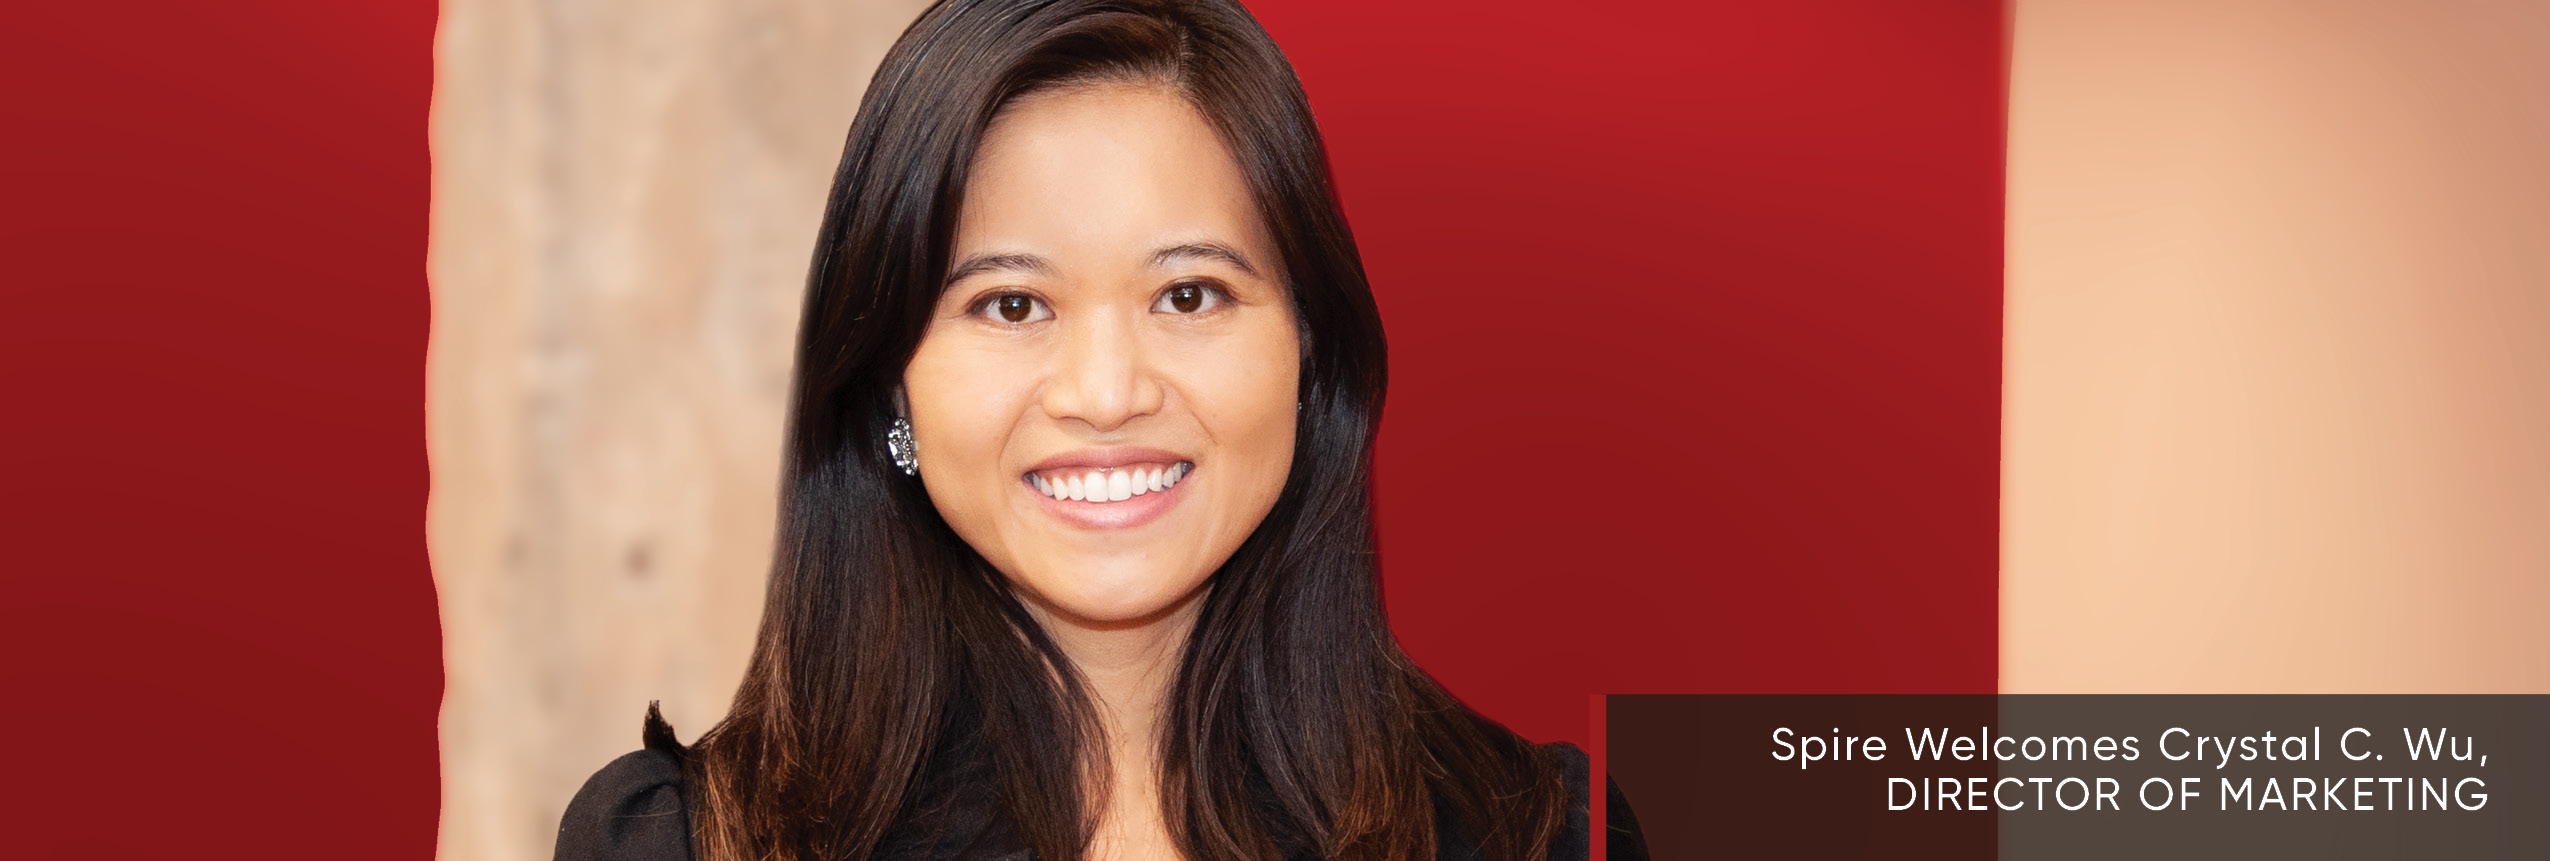 Spire Consulting Group hires marketing director Crystal C. Wu